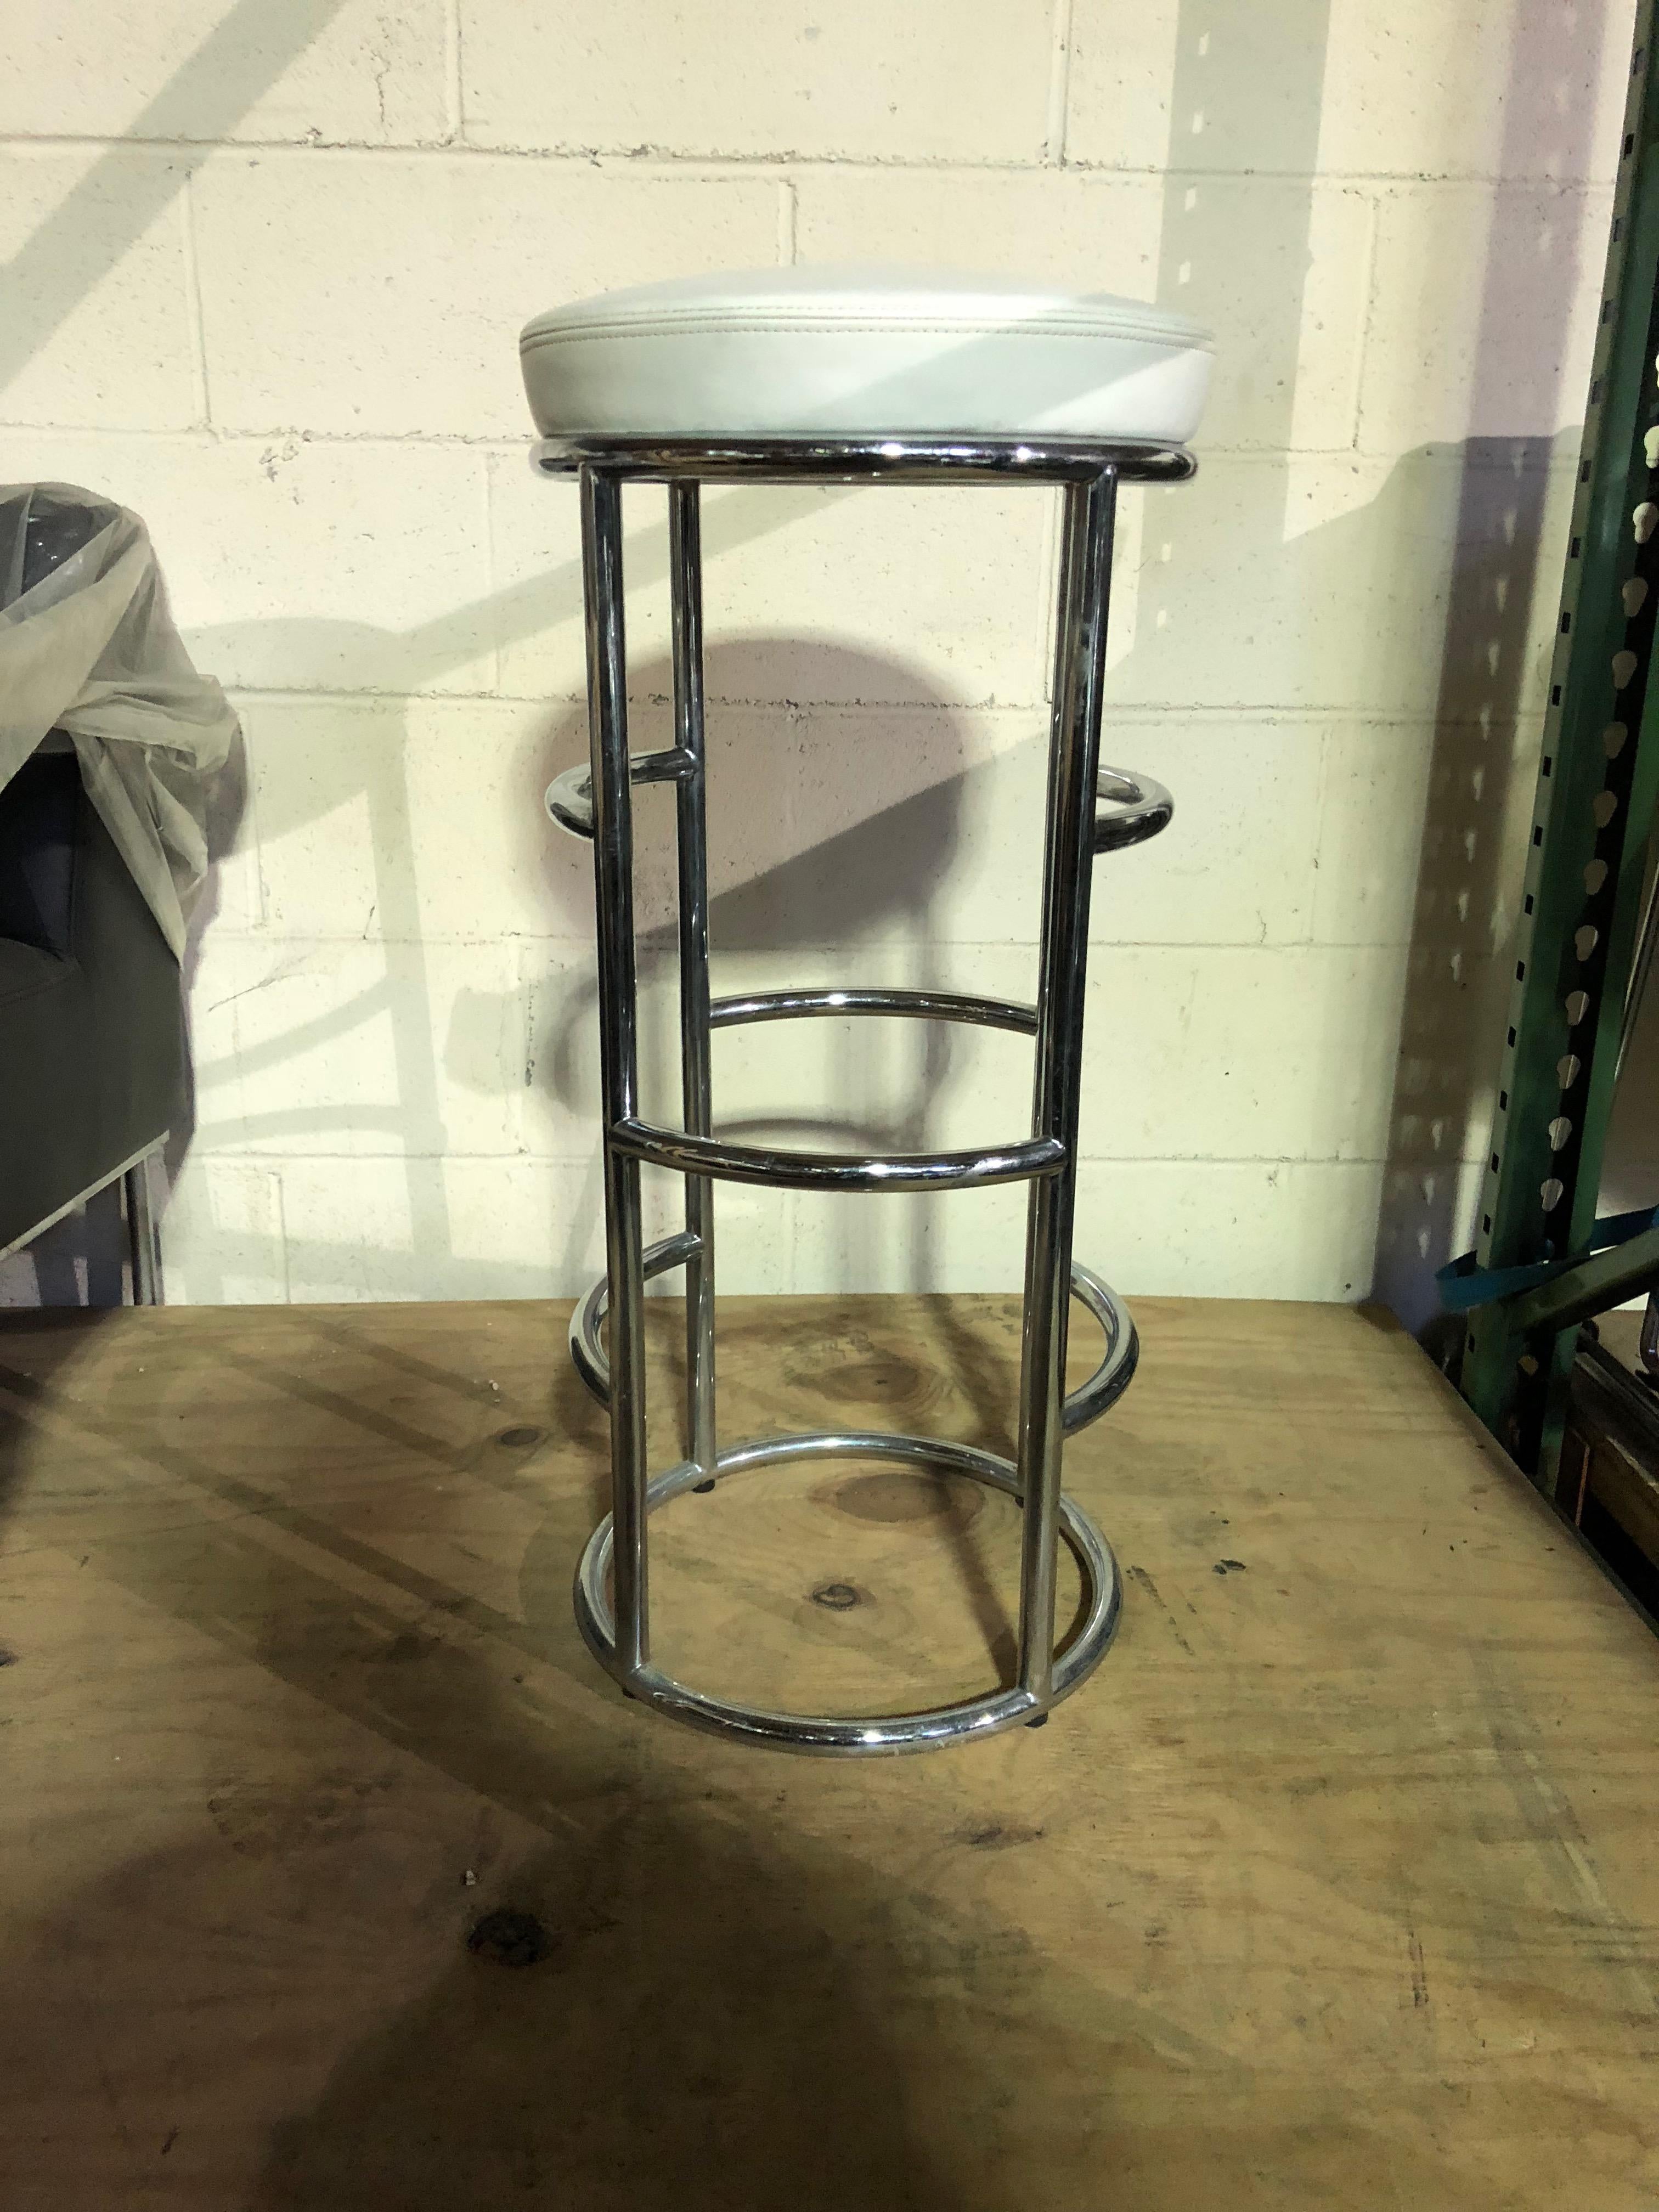 Satish bar stool designed by Eckart Muthesius
Frame of chromium-plated steel tubing.
Original price $1895
Upholstery:
Polyurethane with quilting cotton on a
Beech frame
Satish stool COL (leather)
Artificial leather Vitello Turin grey.
     